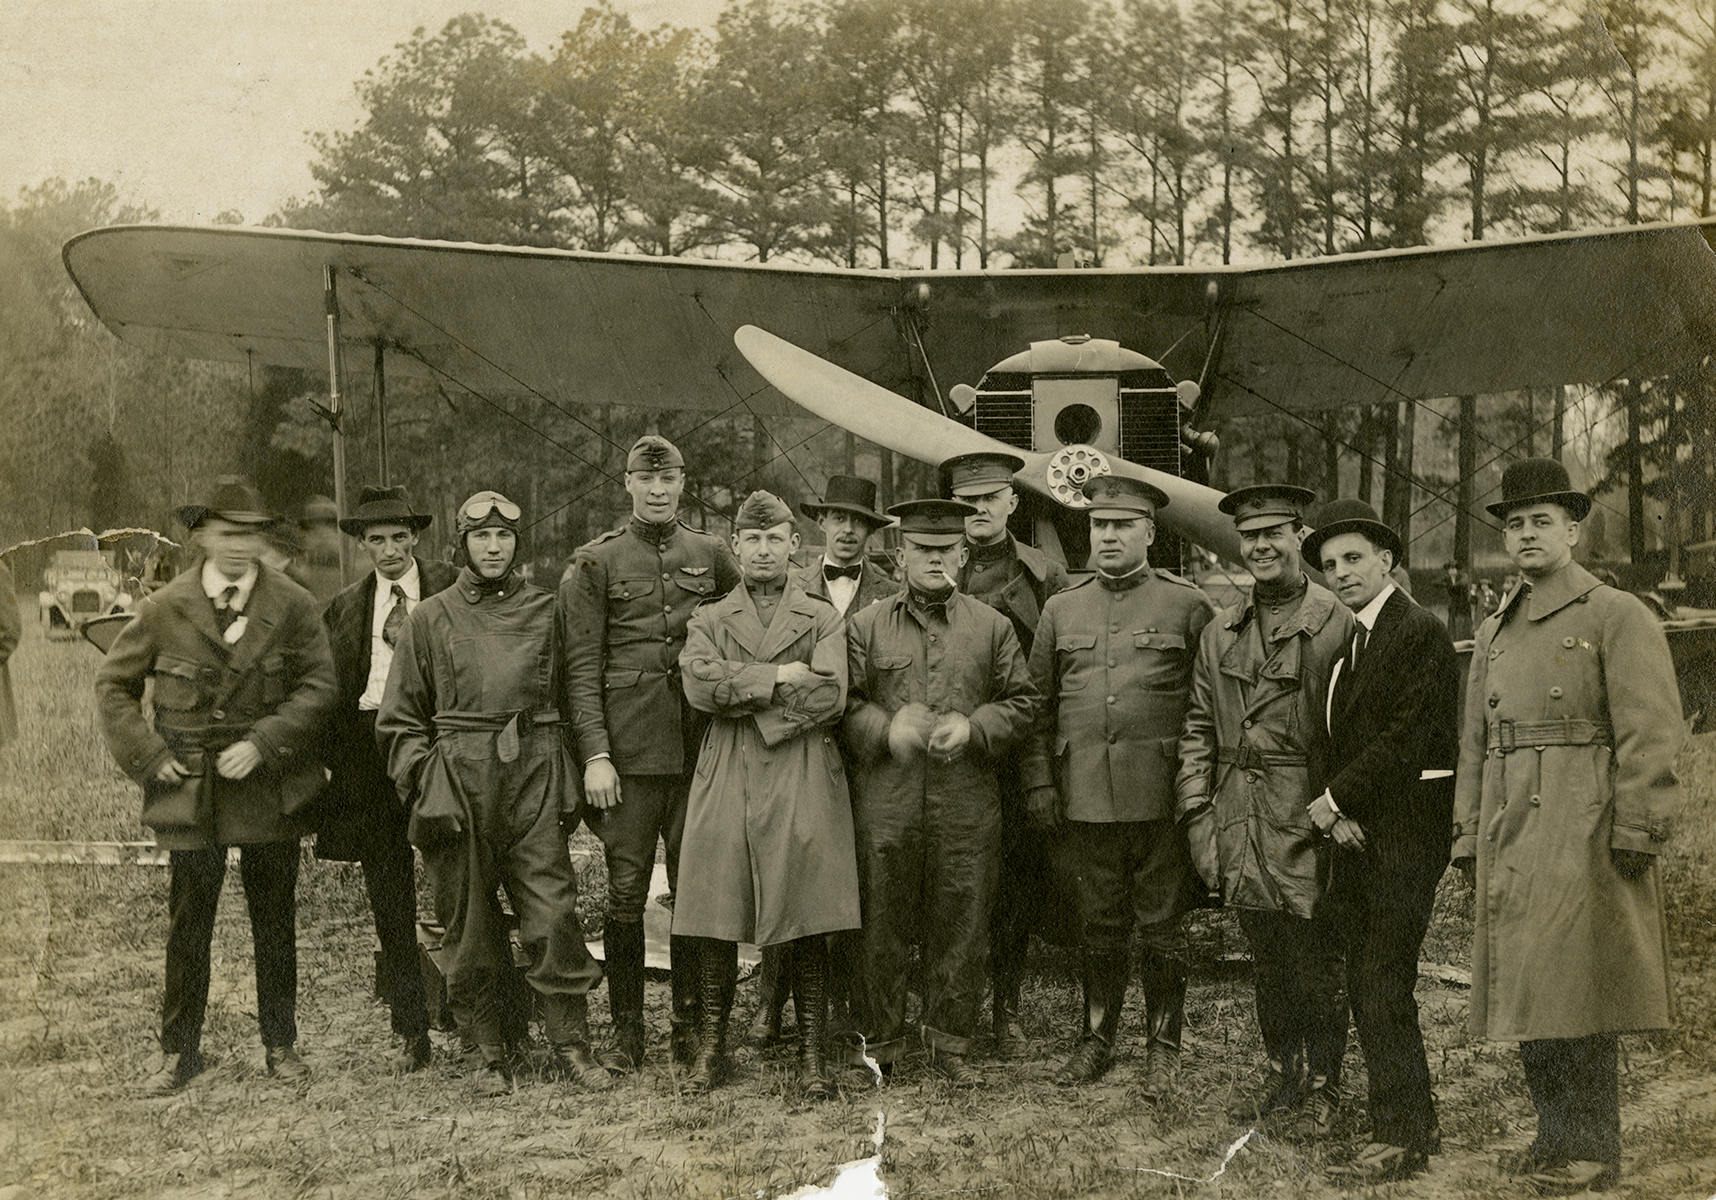 Photograph of Lt. Sylvanus Ingram and an early biplane, about 1918–1920 (VHS 2006.177.1_v1)